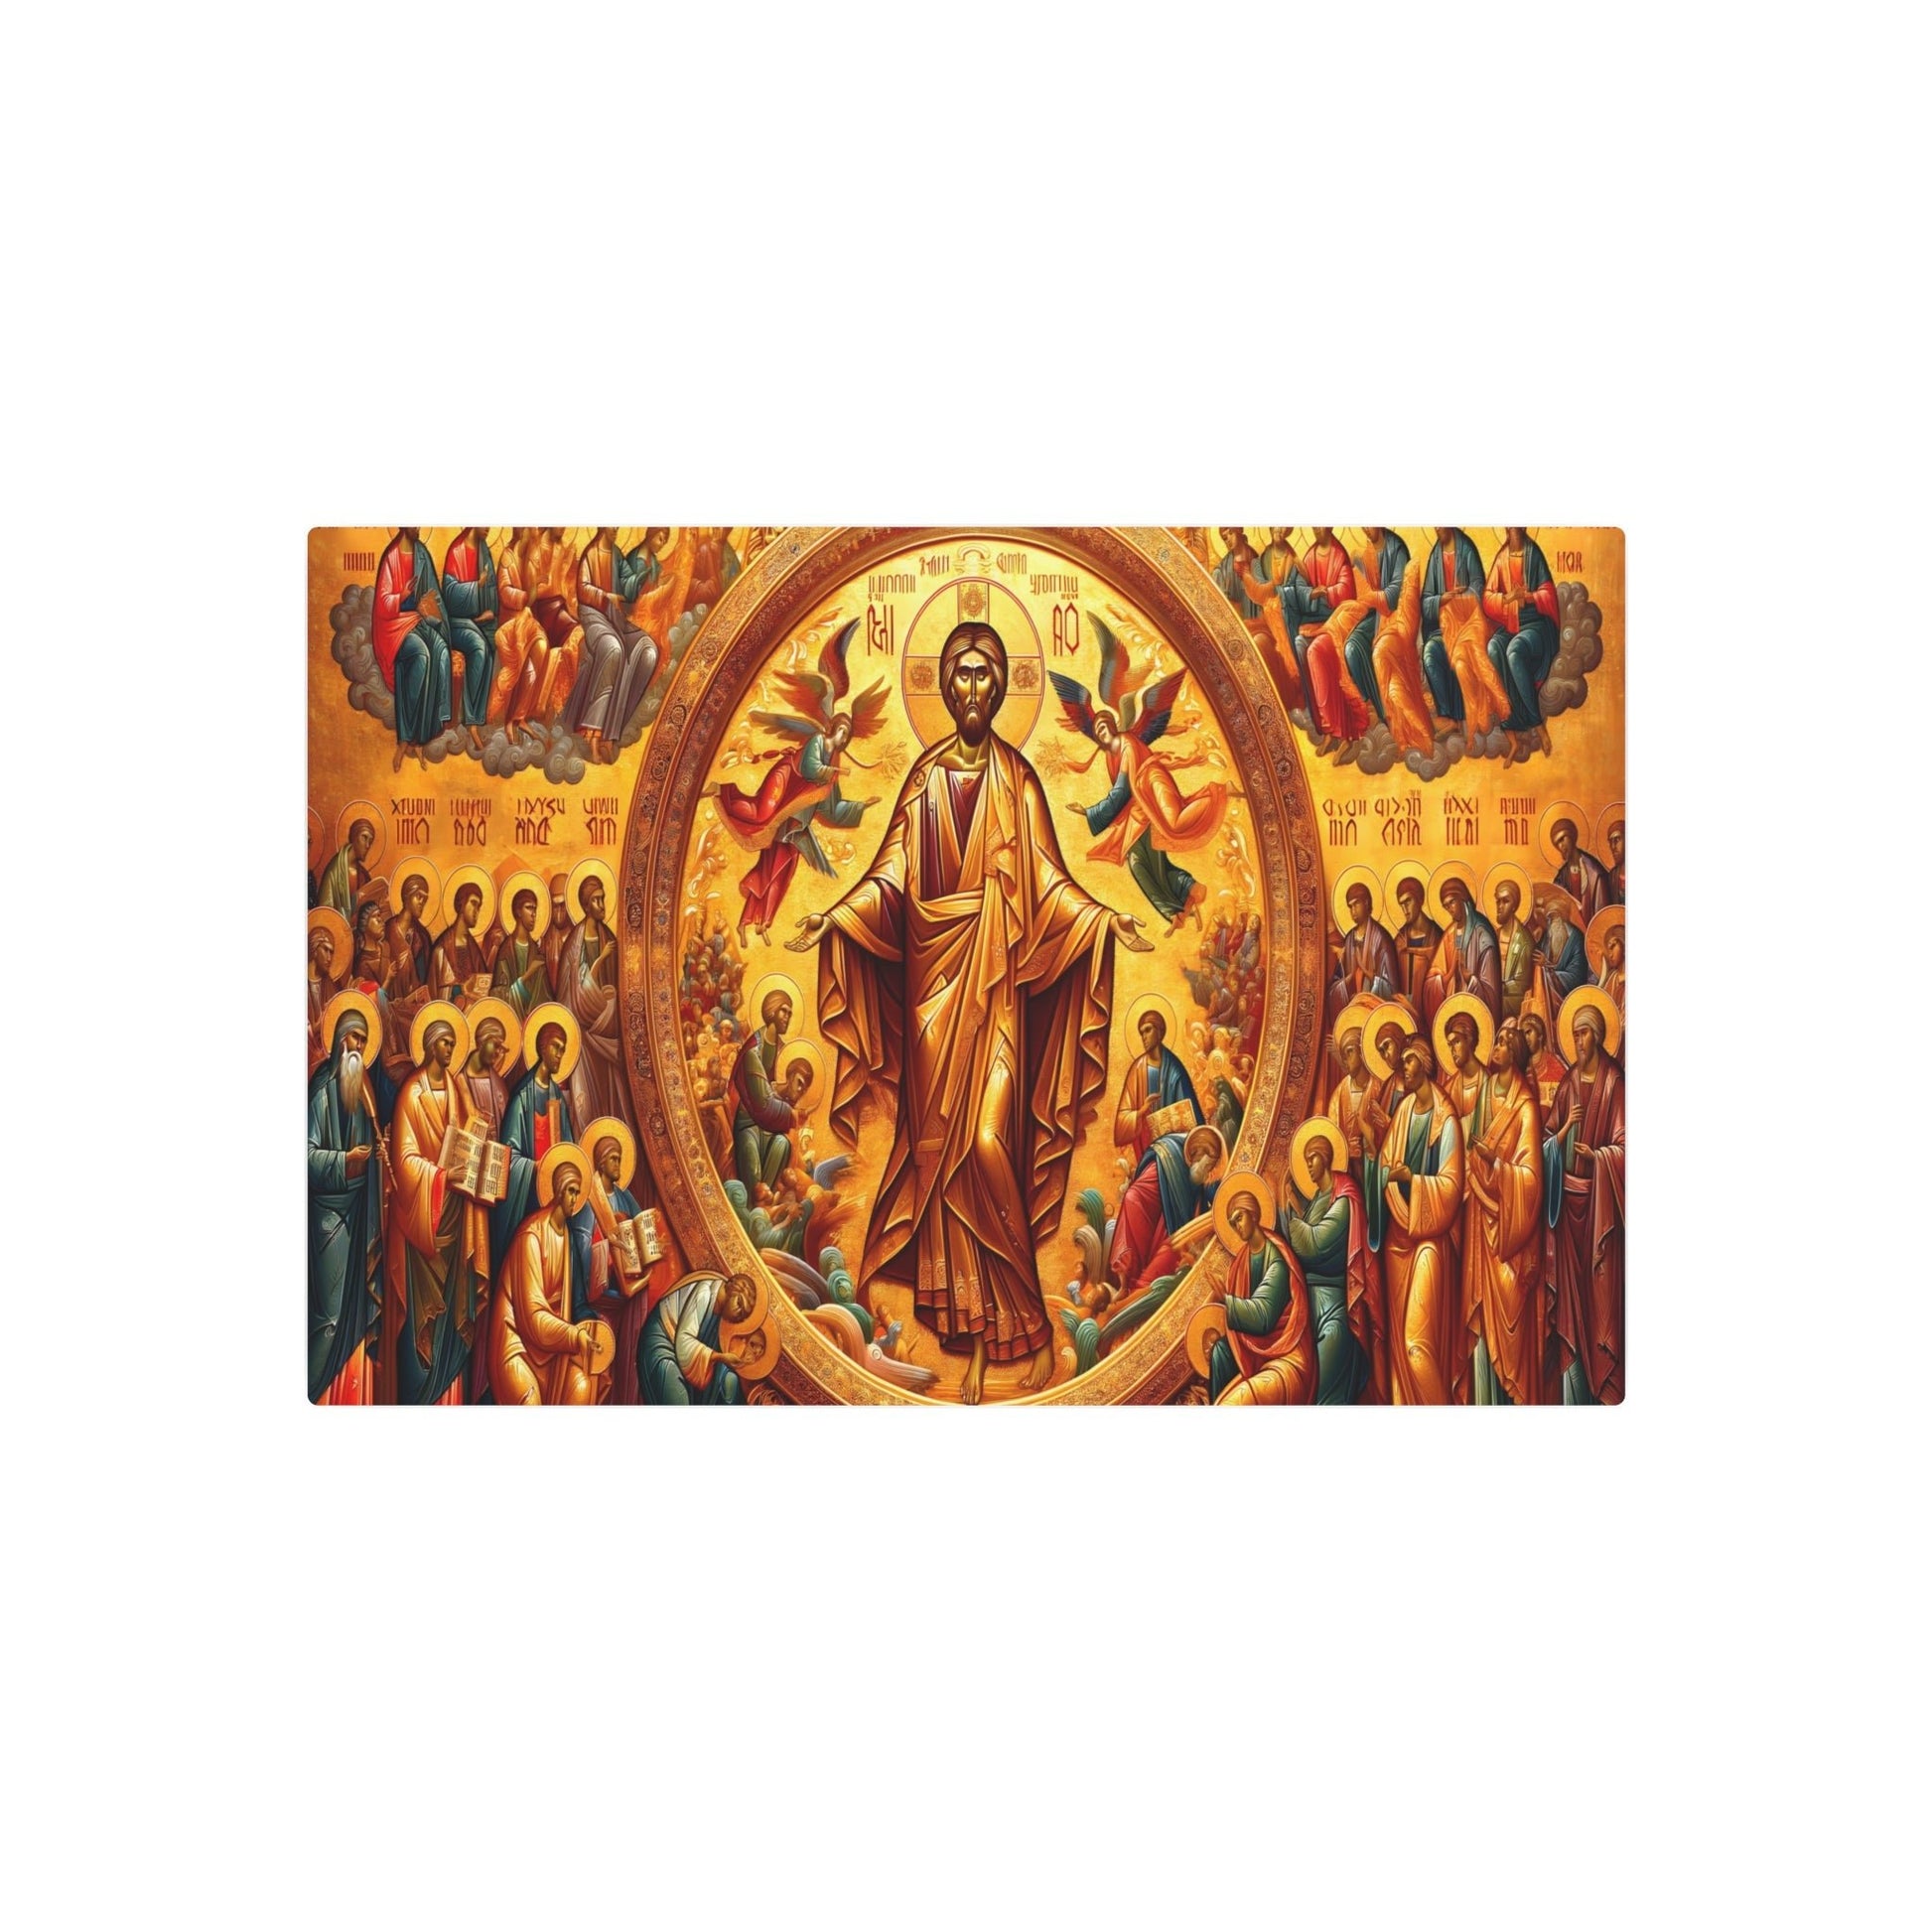 "Religious Byzantine Art Style Masterpiece with Luxurious Gold Backgrounds - Non-Western Global Styles Collection" - Metal Poster Art 30″ x 20″ (Horizontal) 0.12''